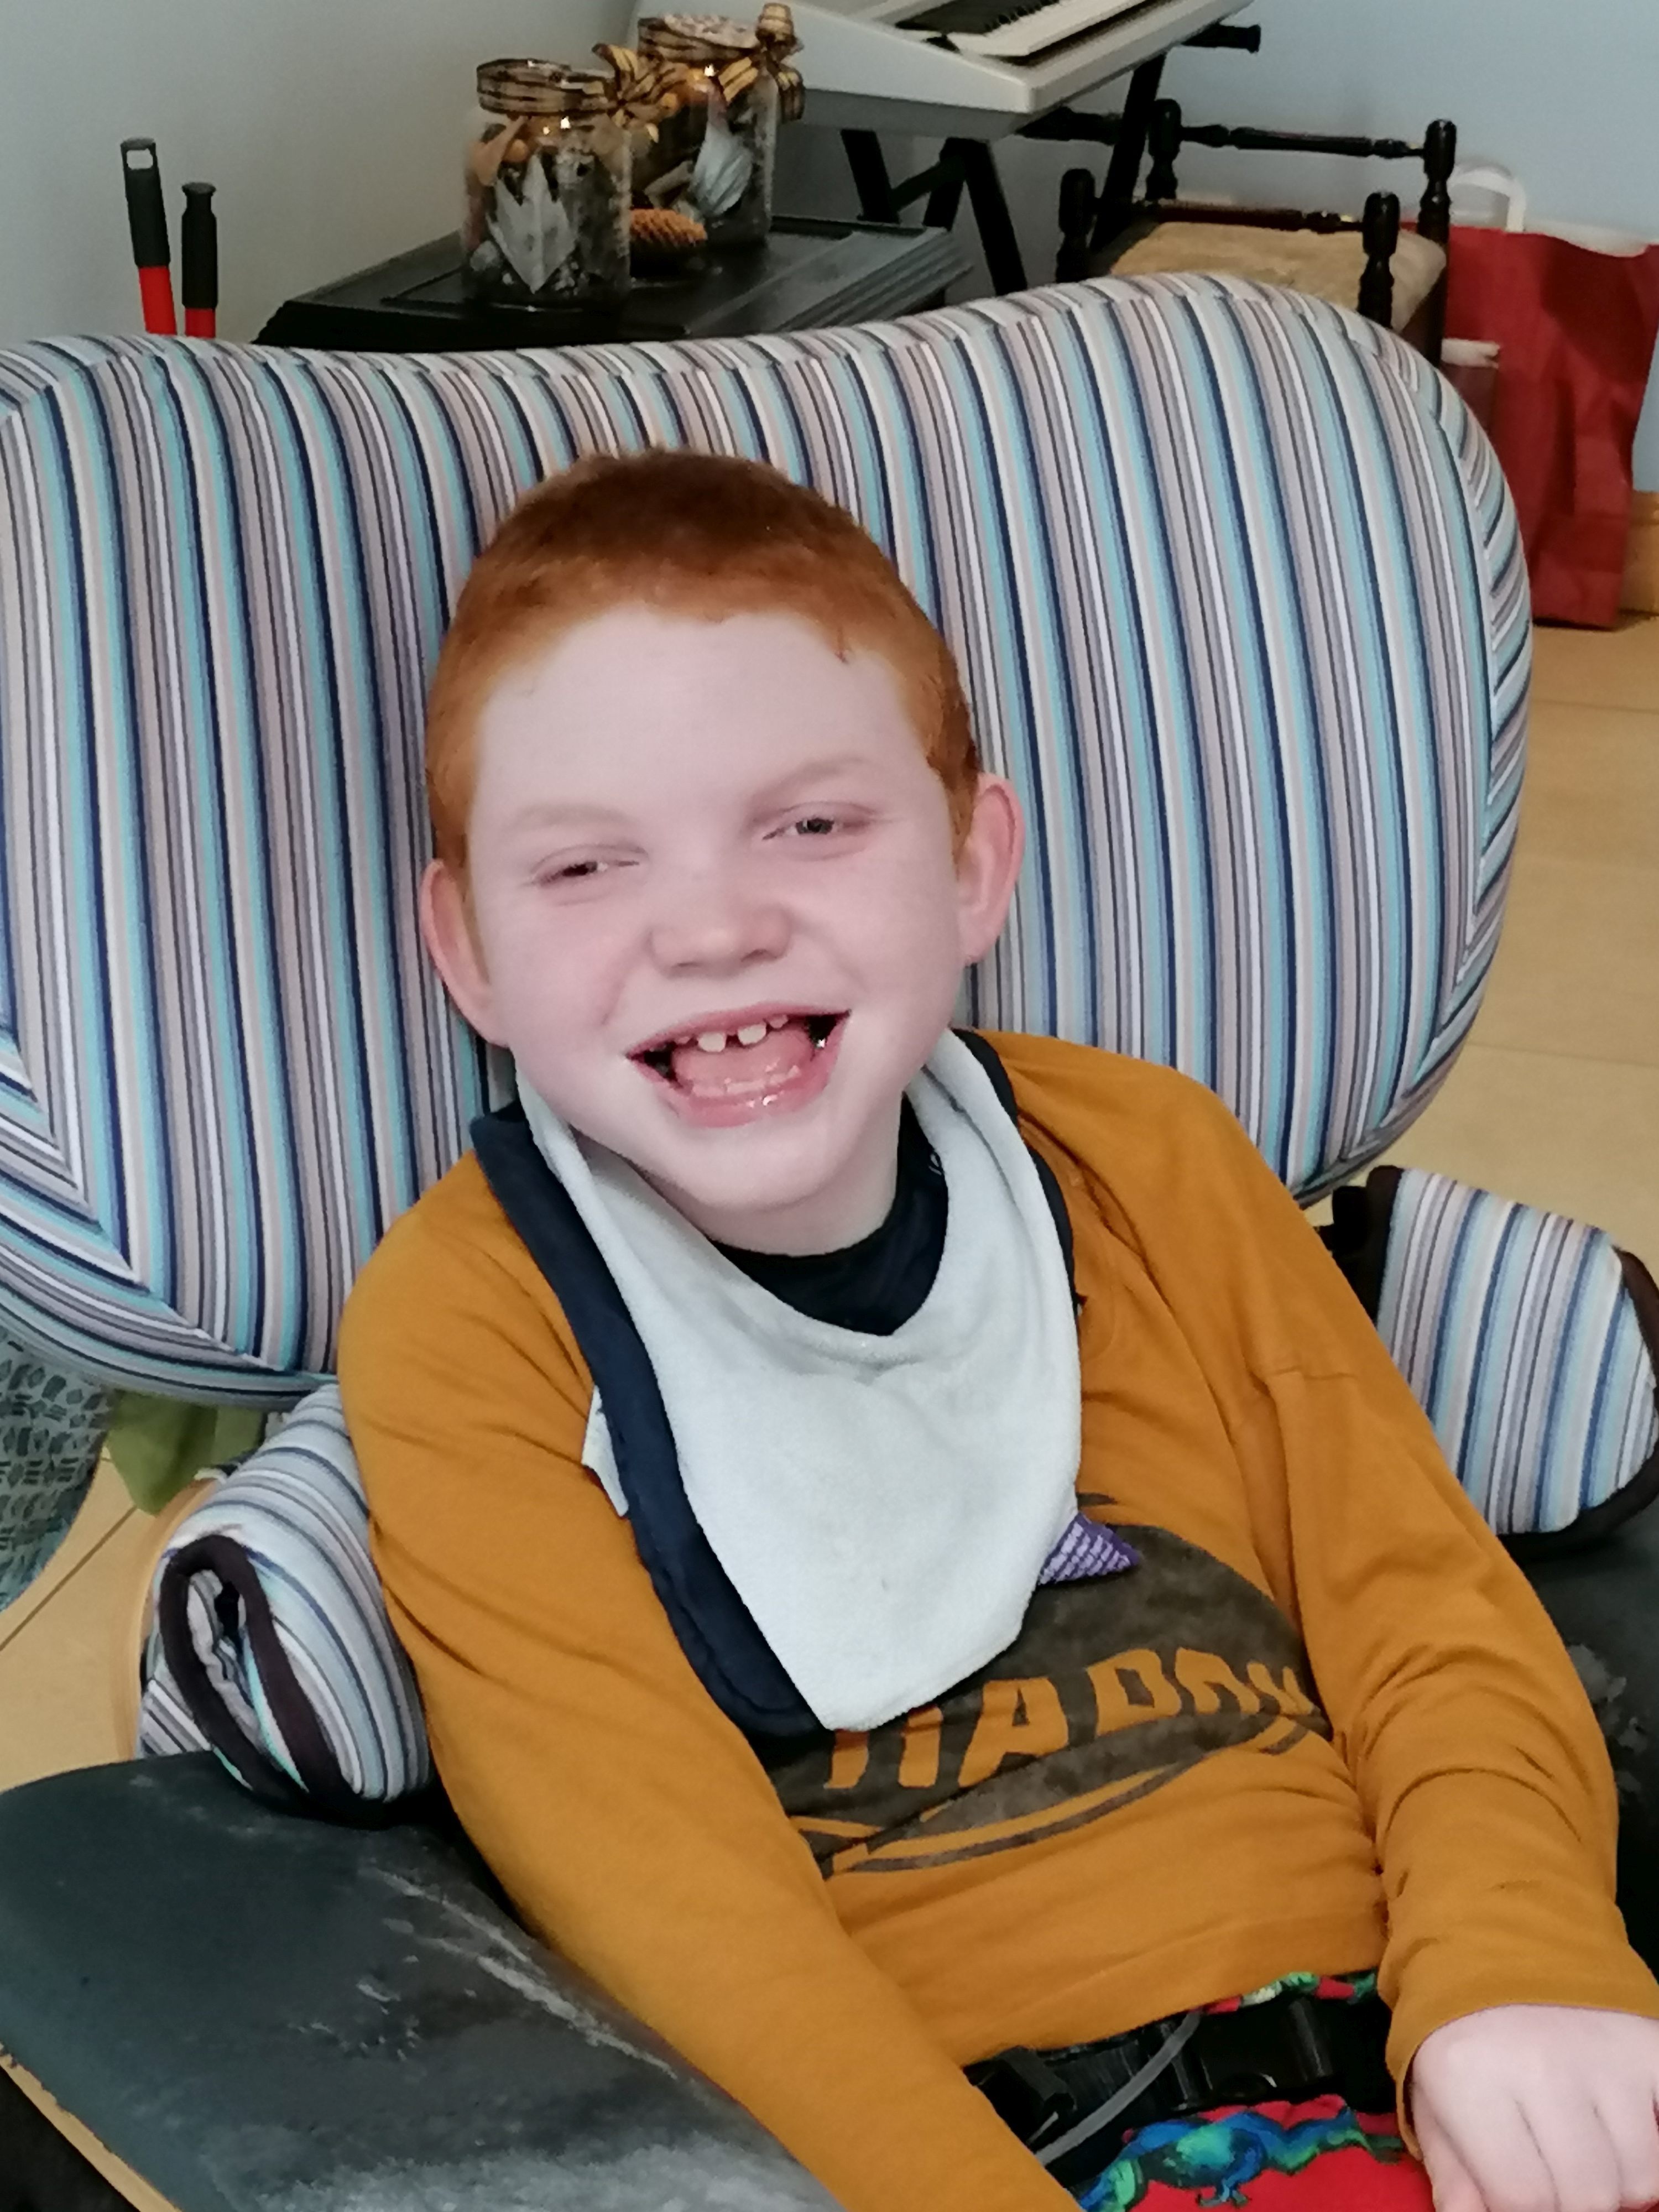 The image shows a smiling Harry Cullen at home, sitting in his chair, wearing an orange top